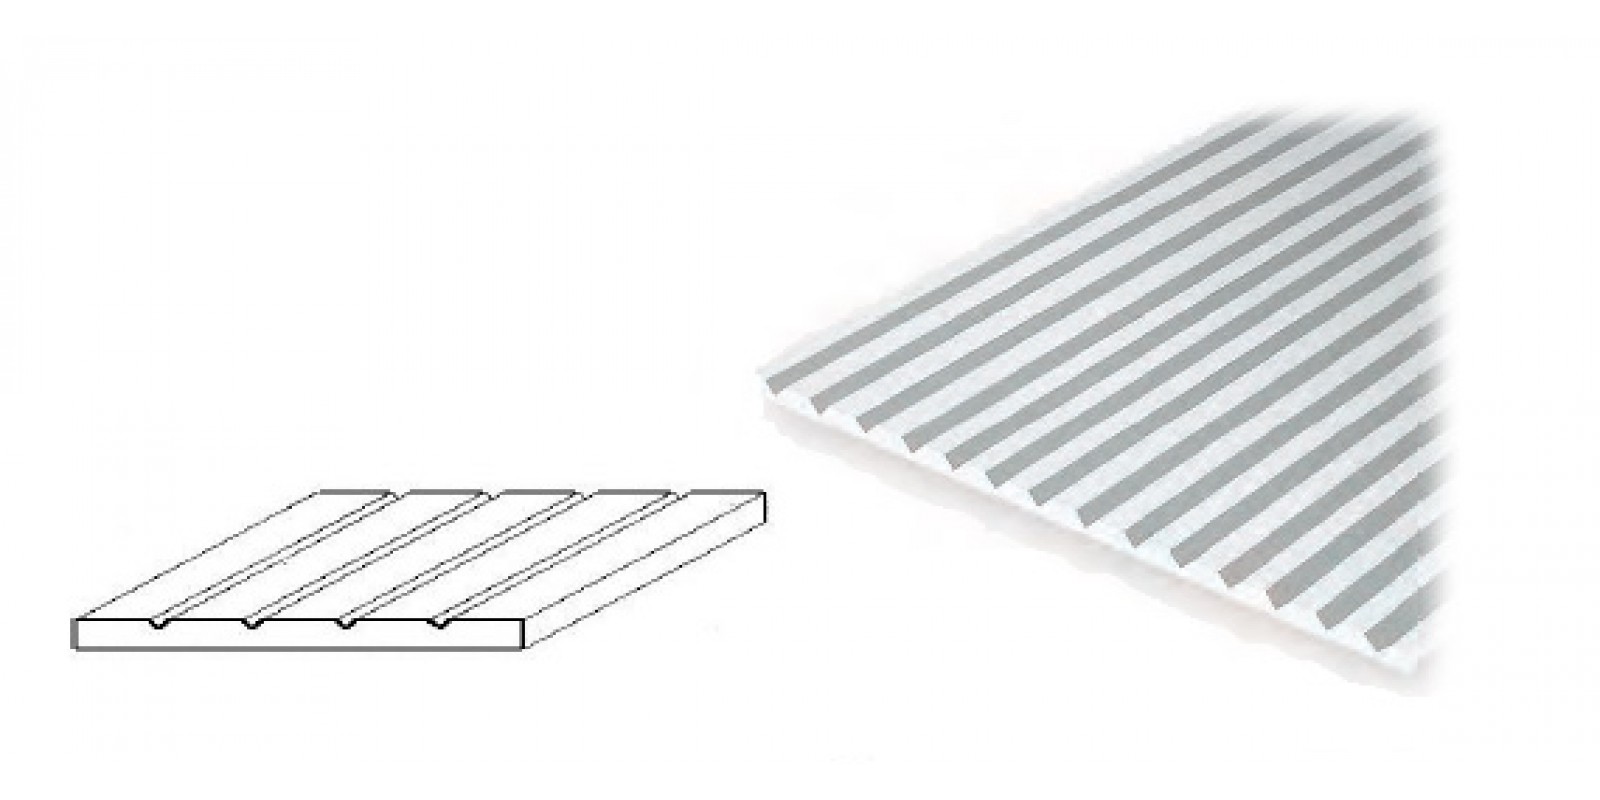 FA504125 Gauge Neutral structured plate with V-groove, white, 300 x 150 x 1 mm, grid: 3.2 mm